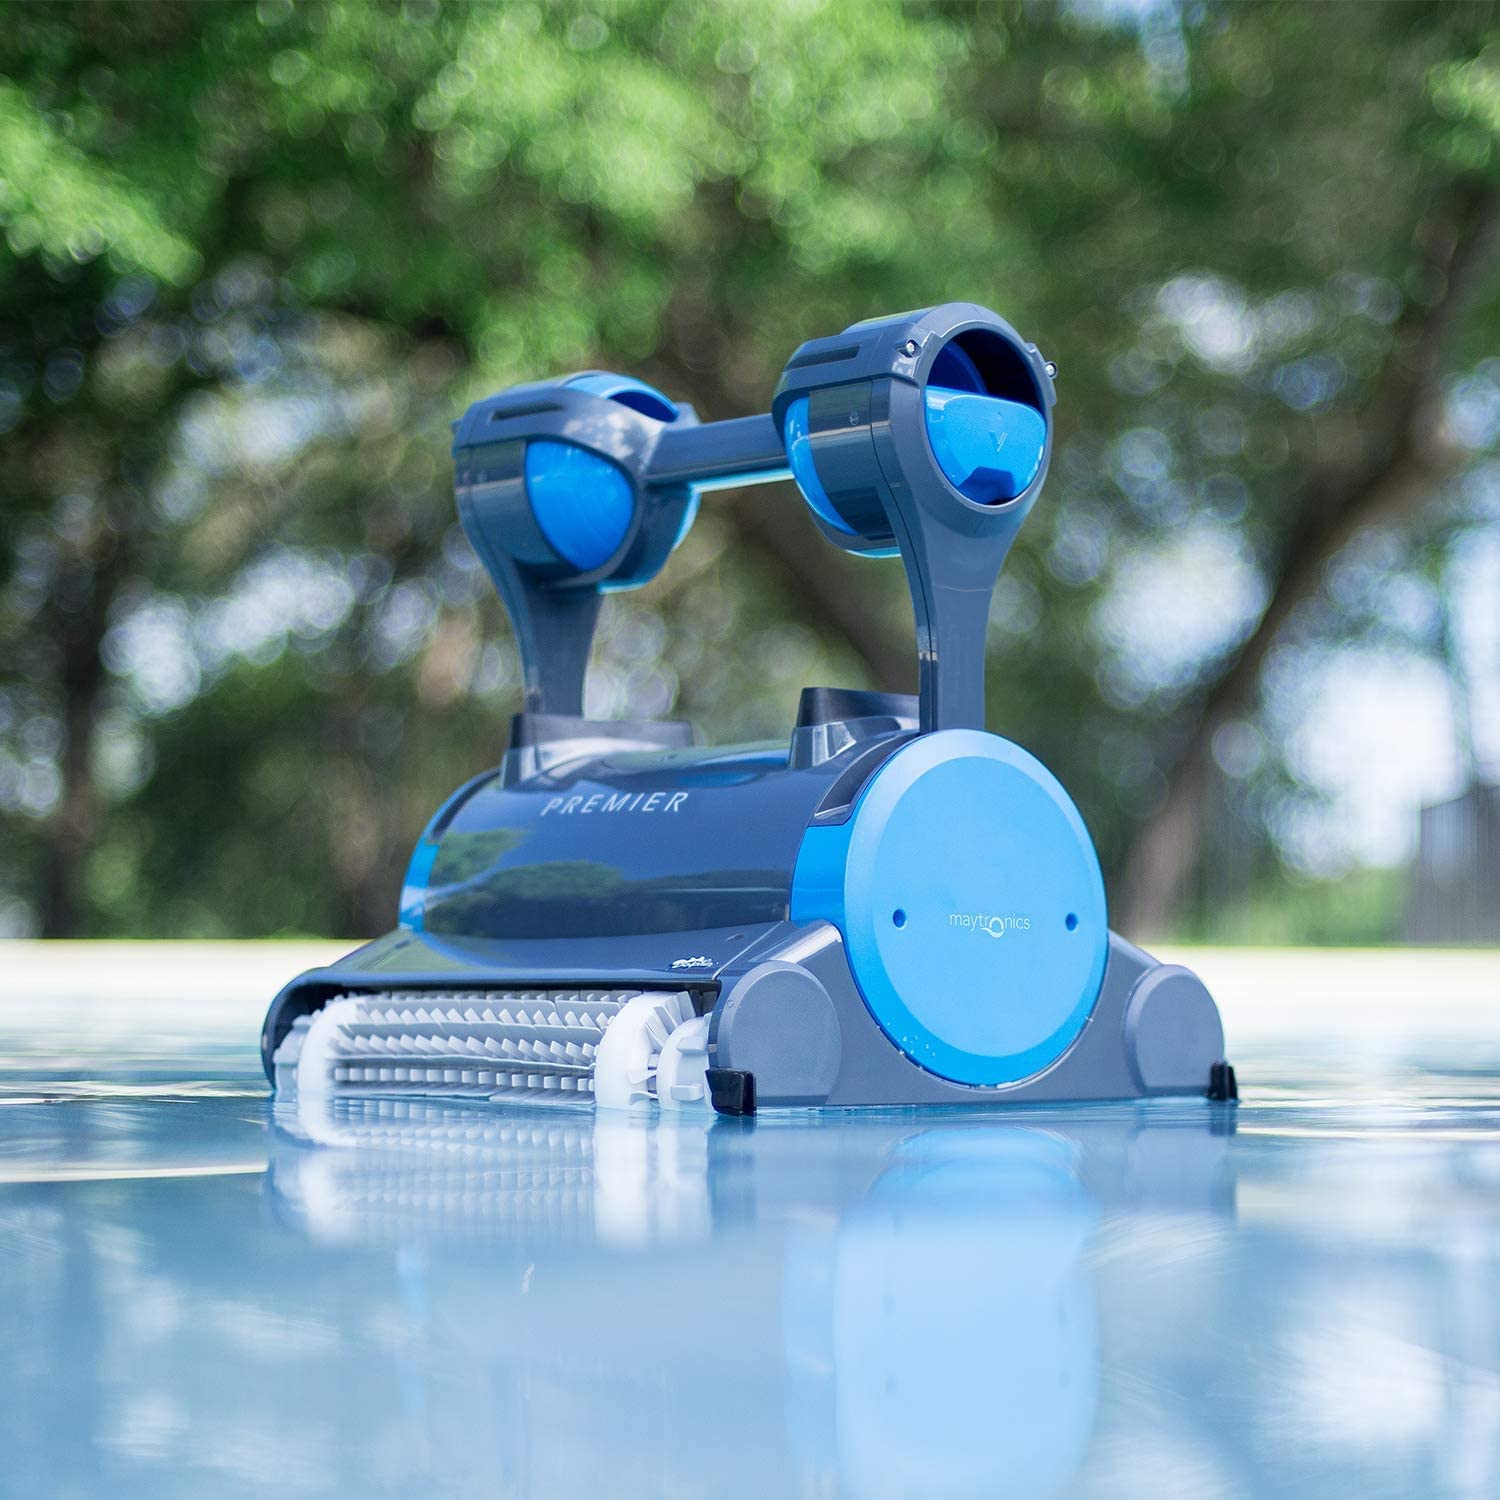 https://www.product-analyze.com/wp-content/uploads/2022/07/Dolphin-Premier-Robotic-Pool-Cleaner.jpg